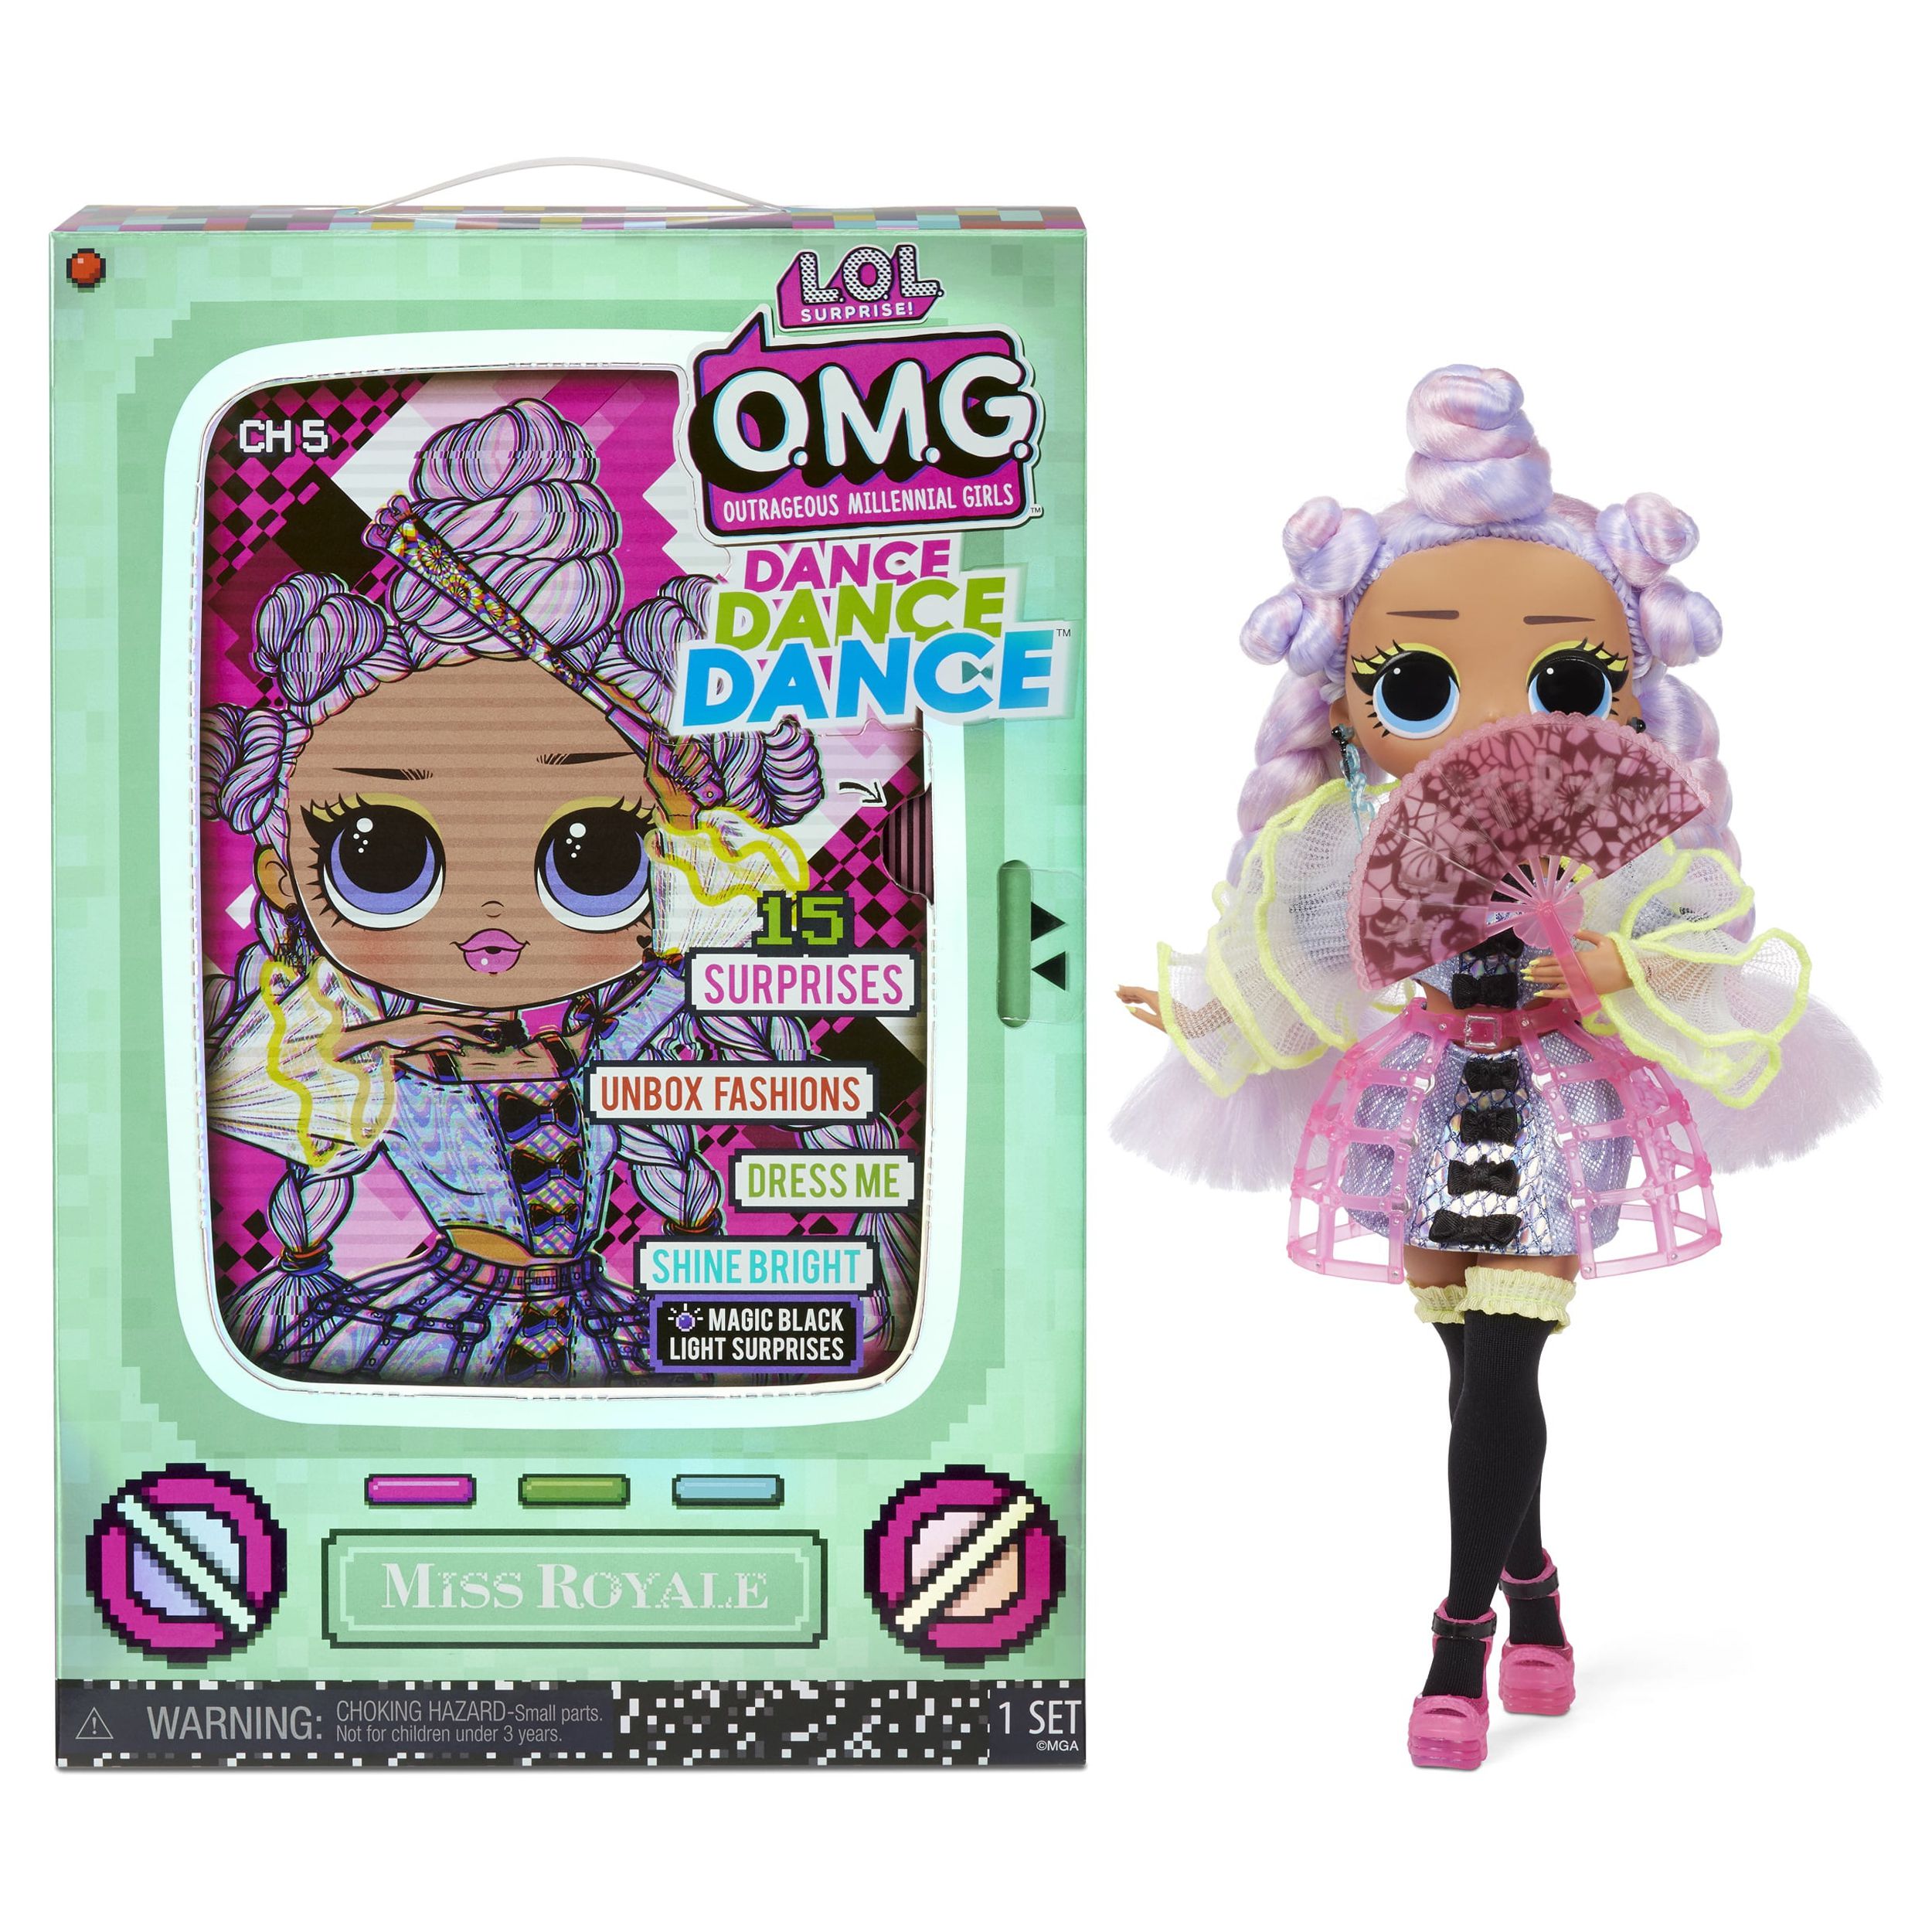 LOL Surprise OMG Dance Dance Dance Miss Royale Fashion Doll With 15 Surprises Including Magic Blacklight, Shoes, Hair Brush, Doll Stand and TV Package - For Girls Ages 4+ - image 1 of 5